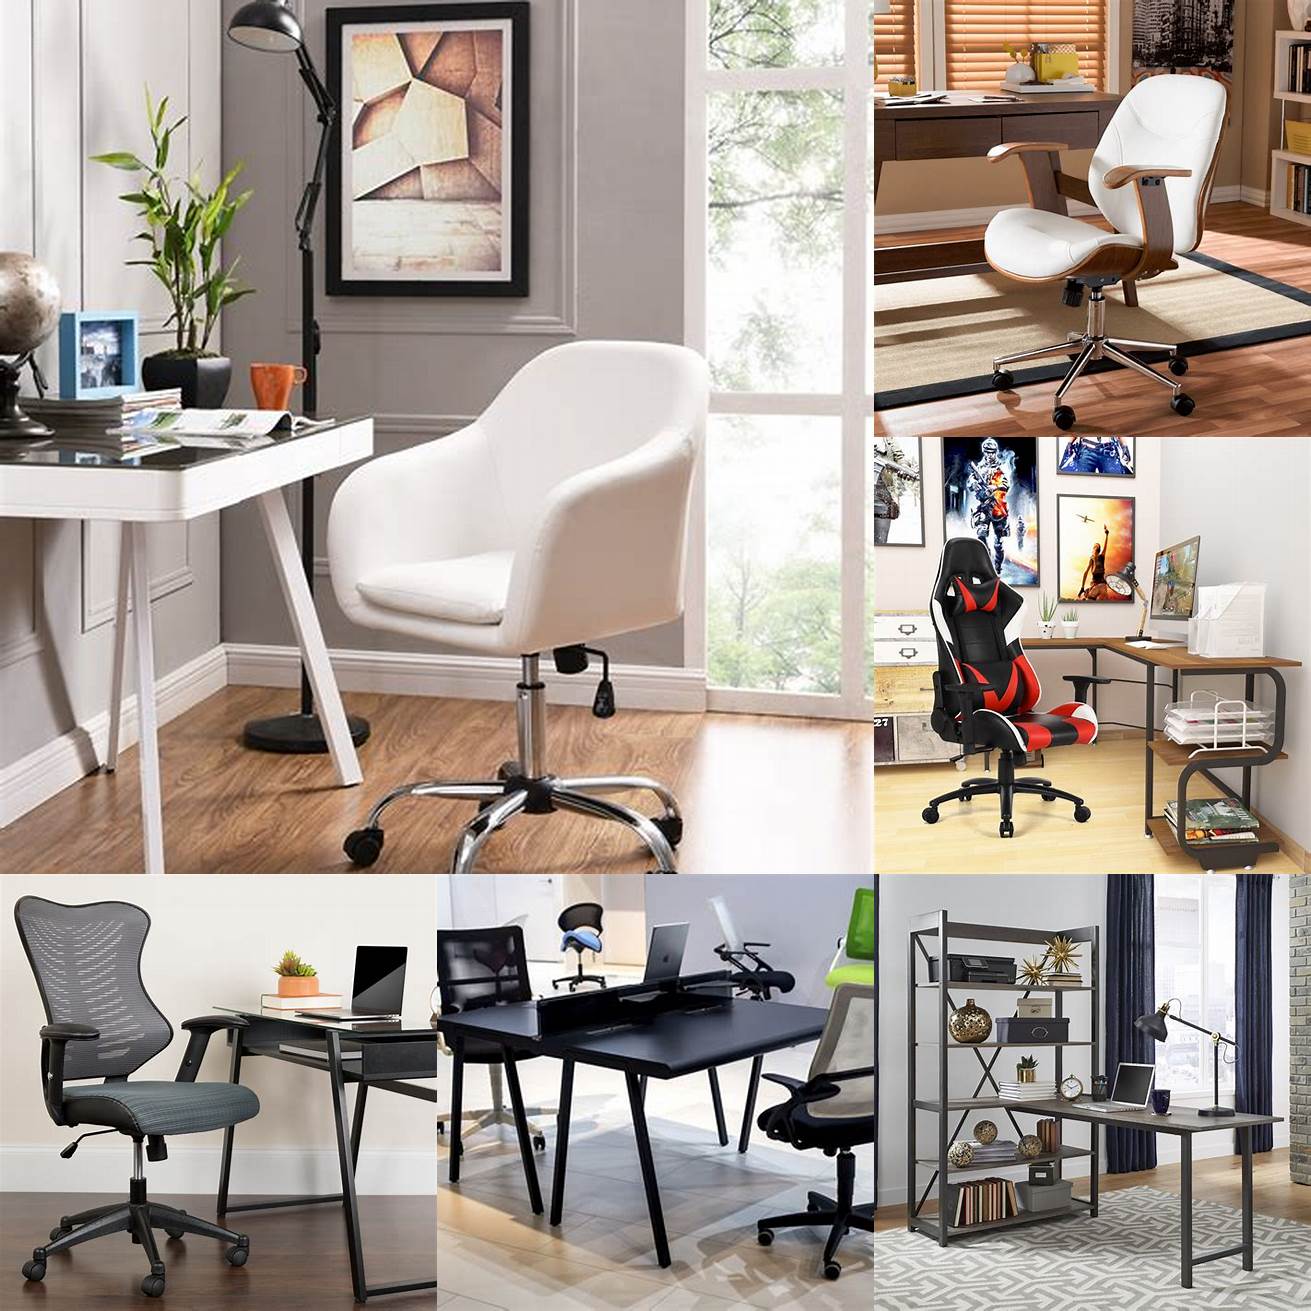 This desk and chair combo is perfect for any home office